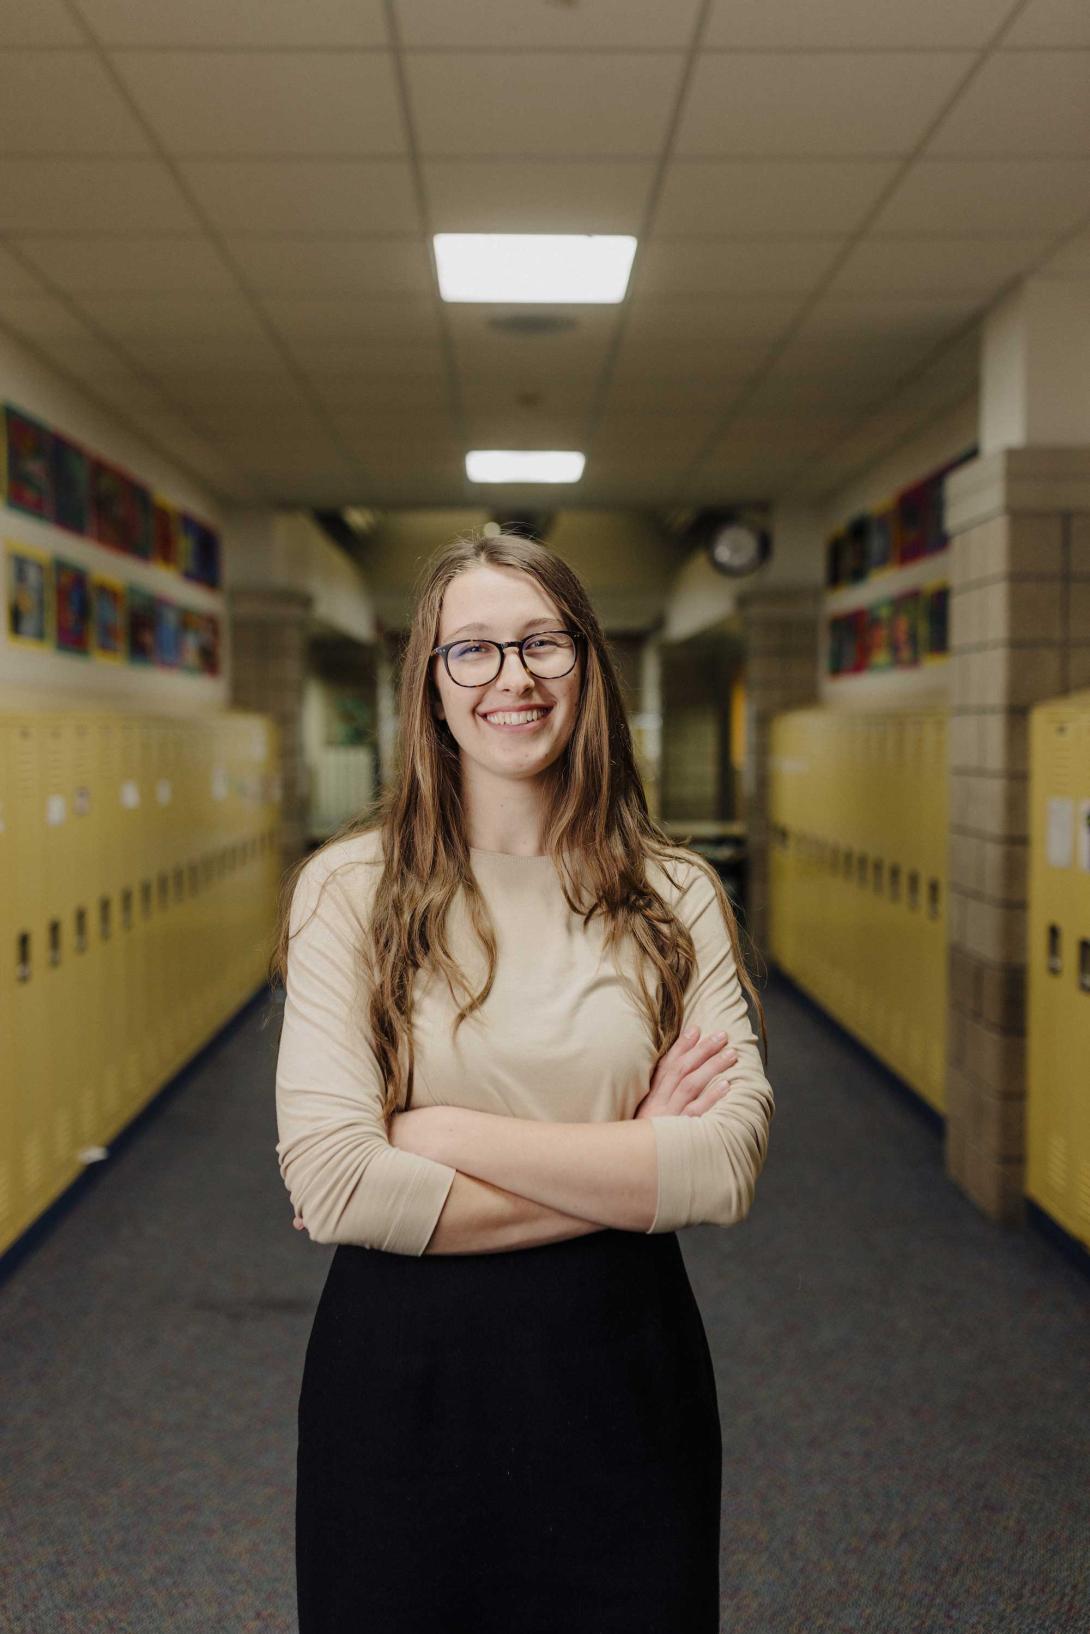 A student teacher folder her arms and smiles in a hallway of lockers.